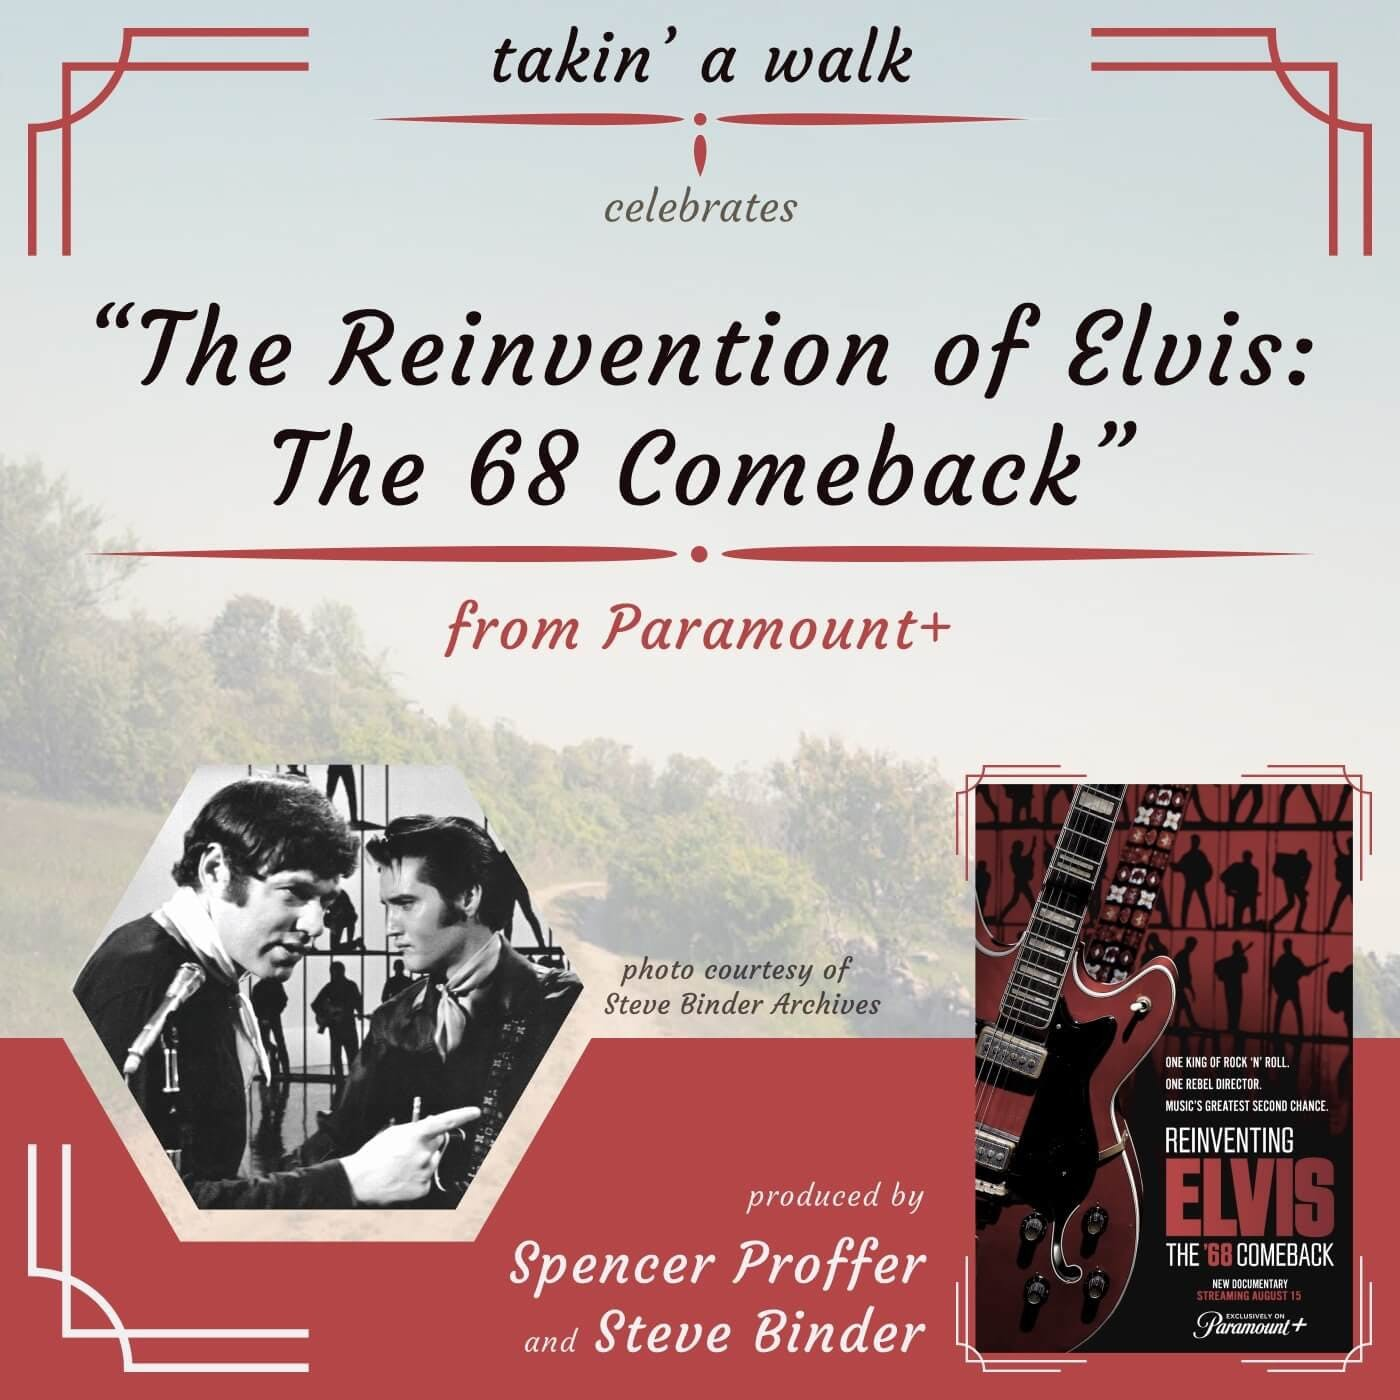 The Reinvention of Elvis with Spencer Proffer, legendary Record Producer and Documentary Filmmaker, and Steve Binder,